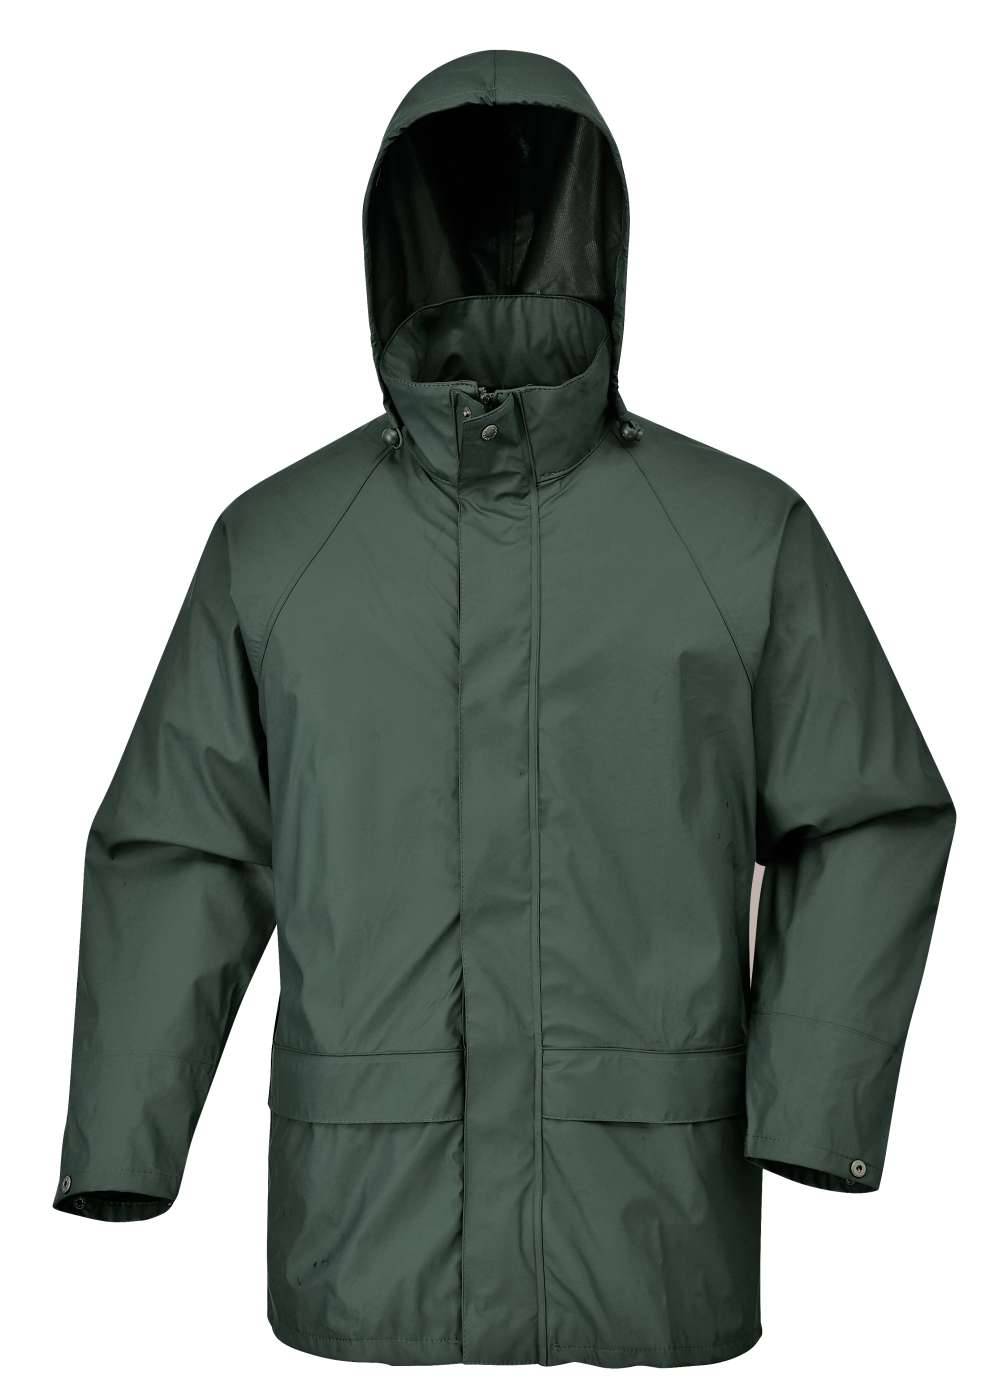 Portwest Sealtex Air Highly Breathable Fully Waterproof Jacket S350